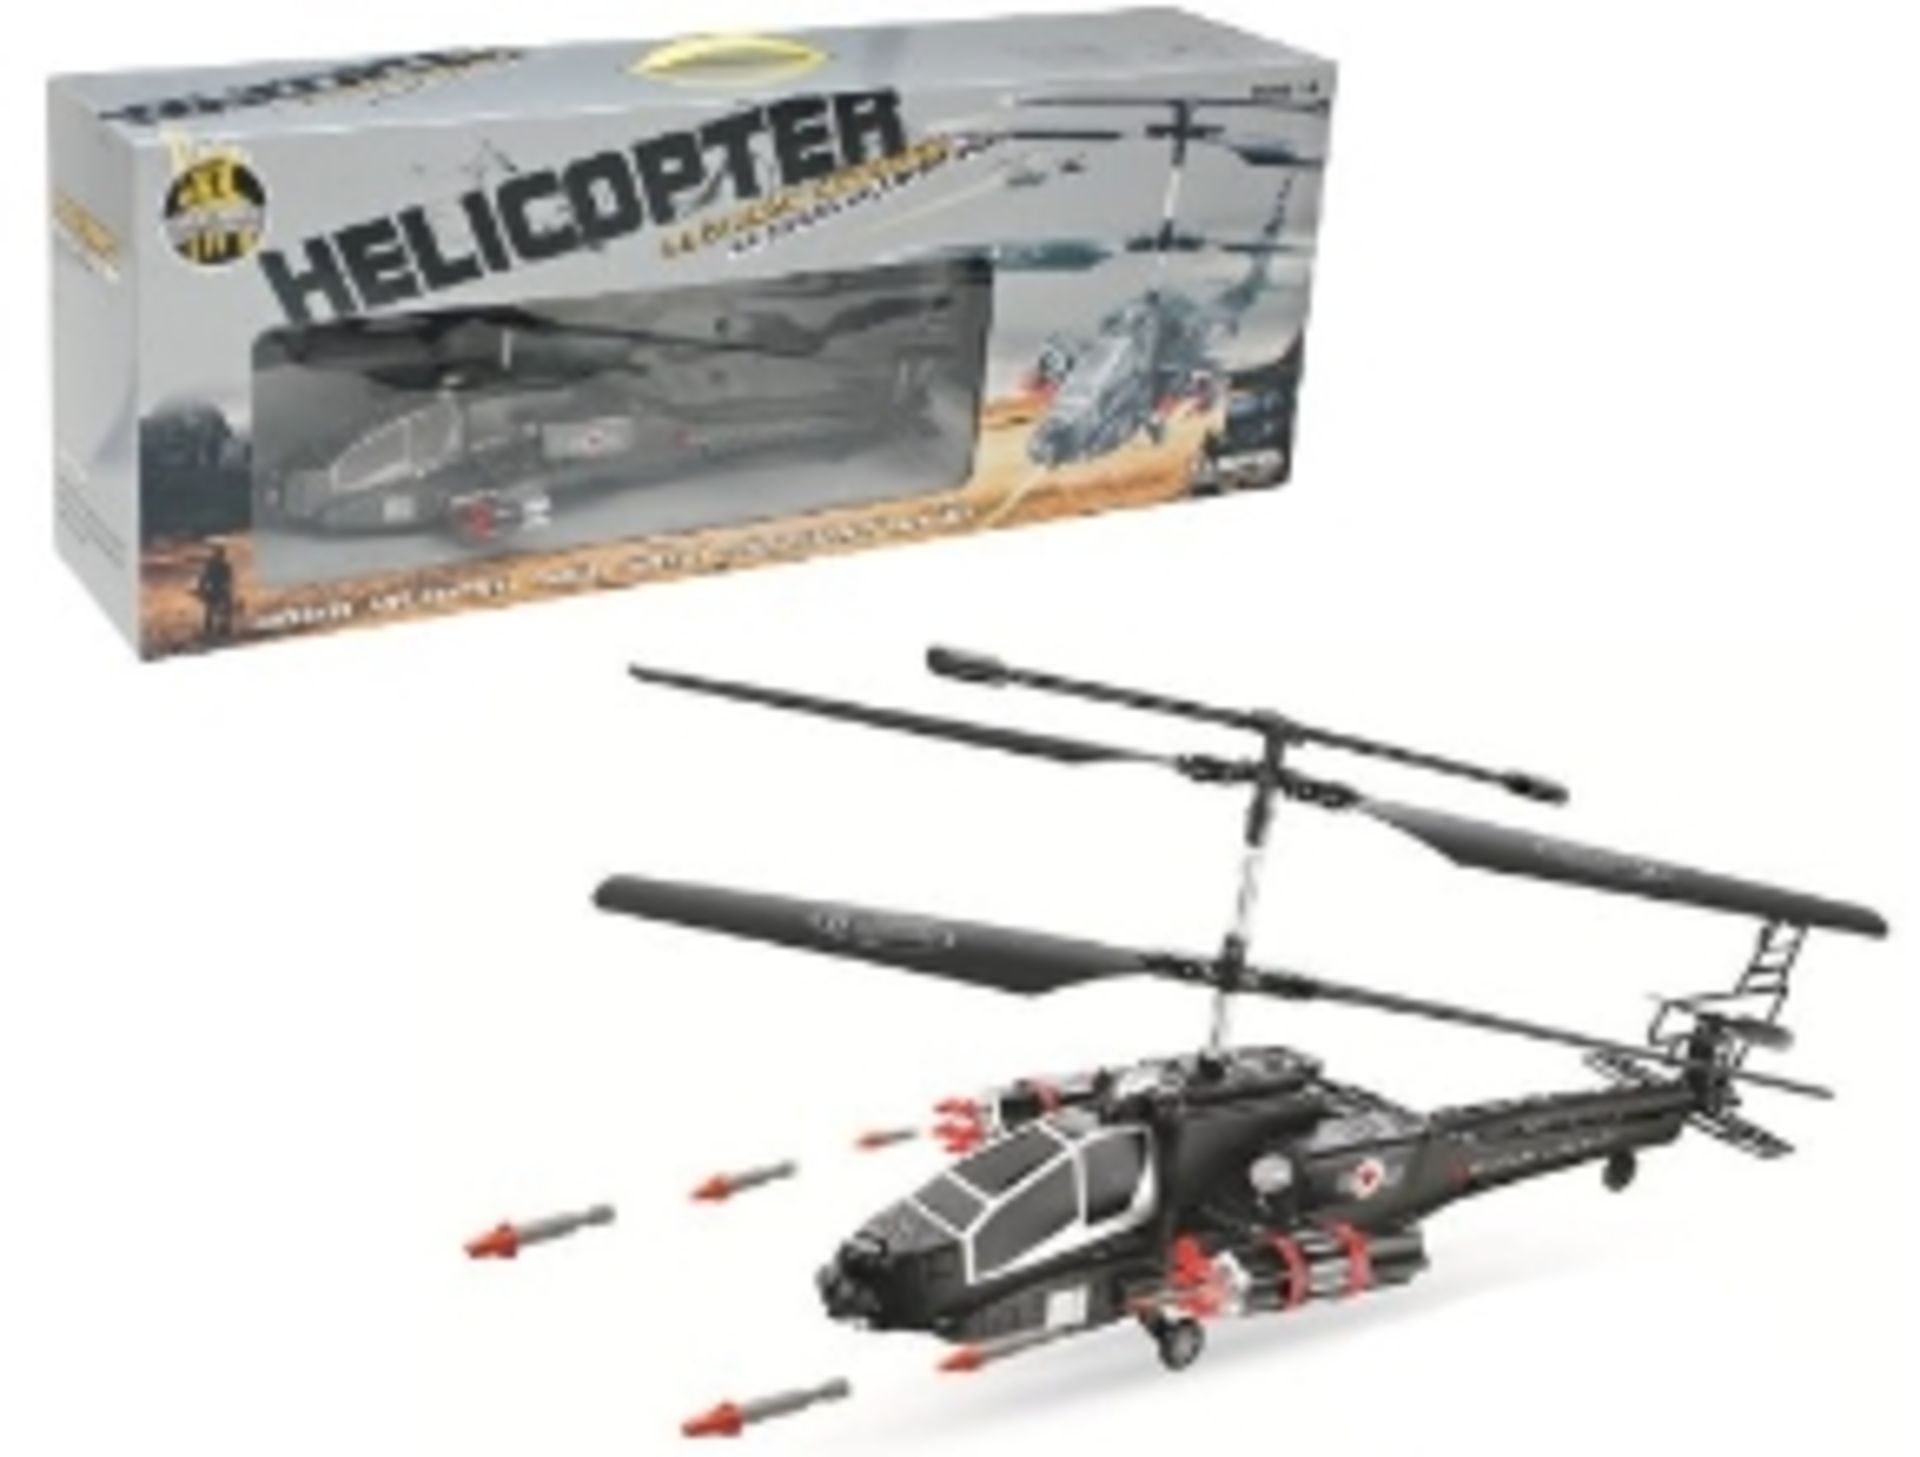 V *TRADE QTY* Brand New Radio Control Military Helicopter With Gyro & Twin Firing Rocket